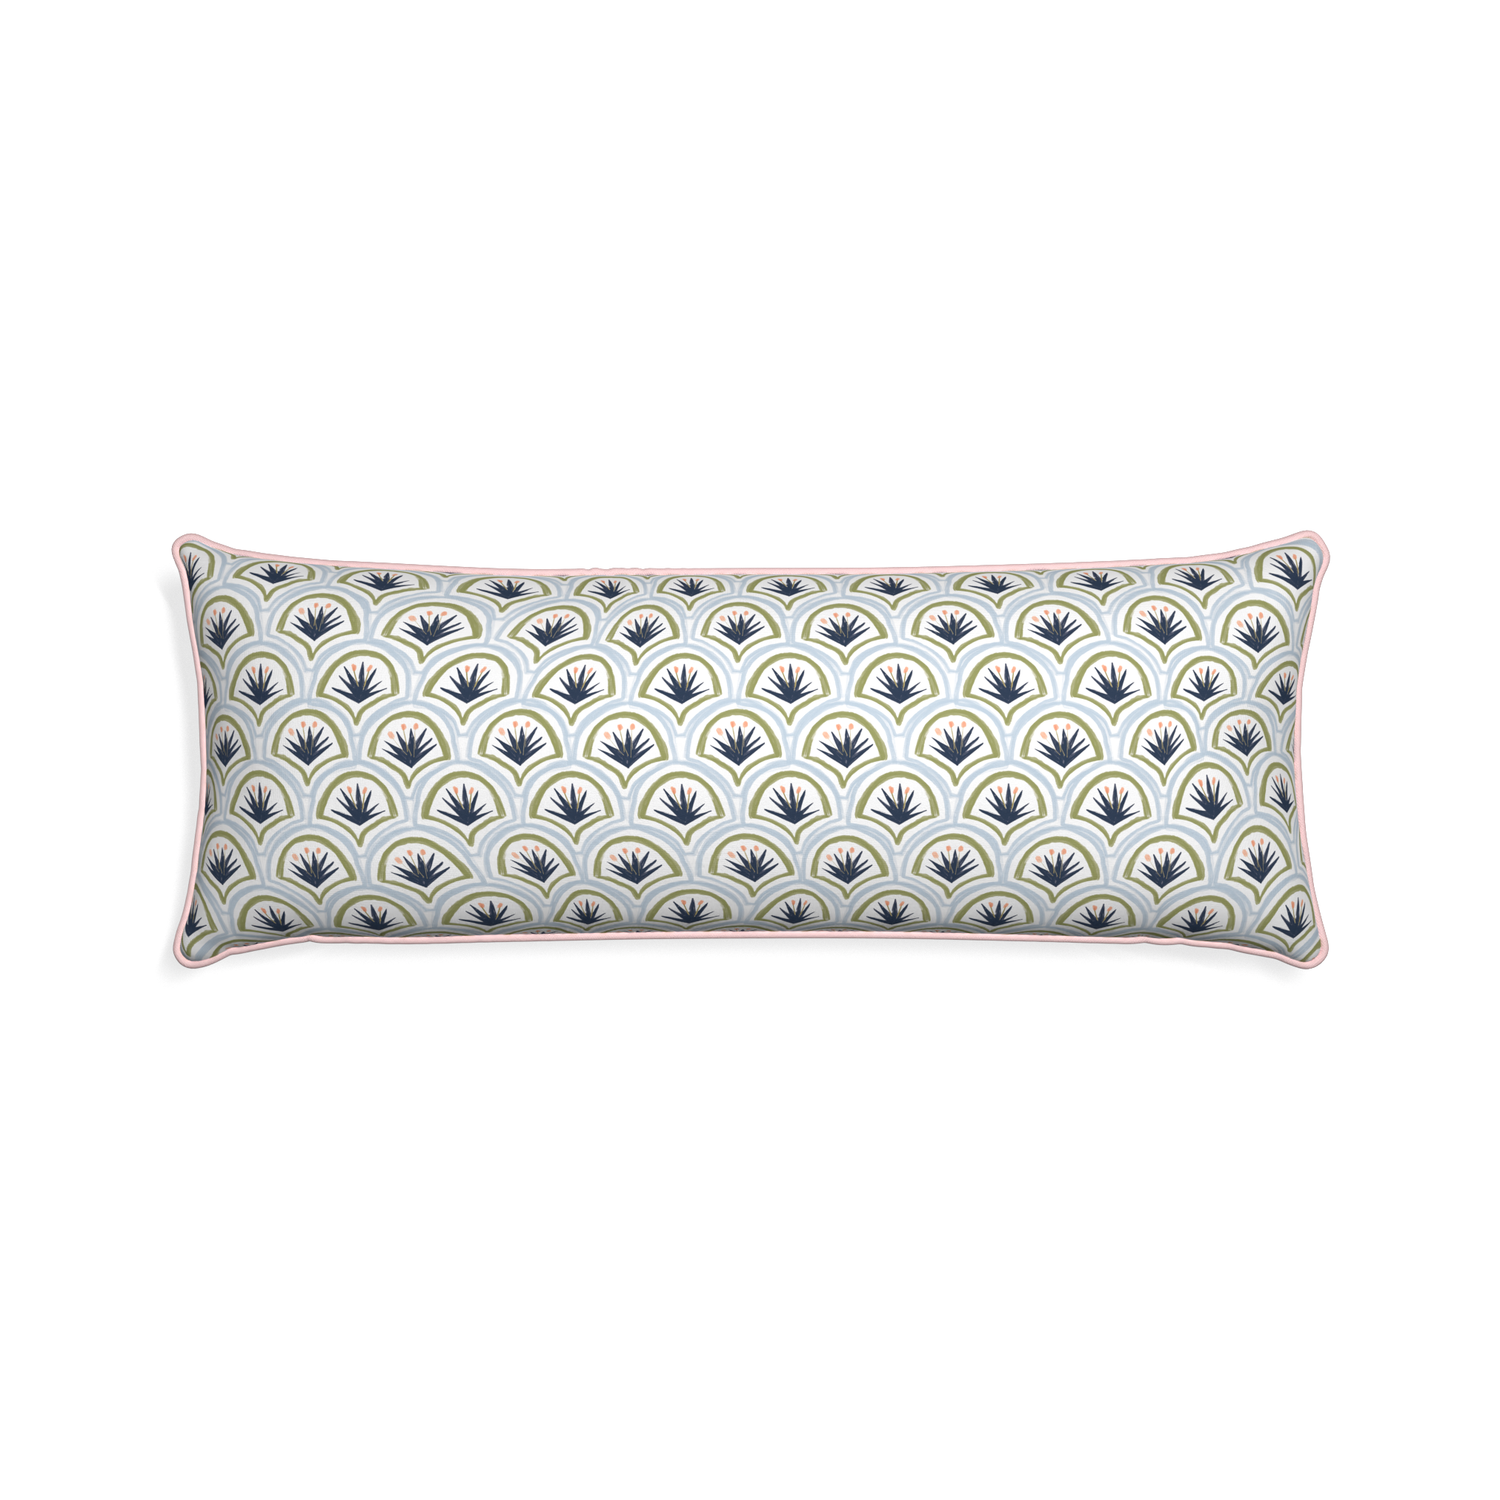 Xl-lumbar thatcher midnight custom art deco palm patternpillow with petal piping on white background